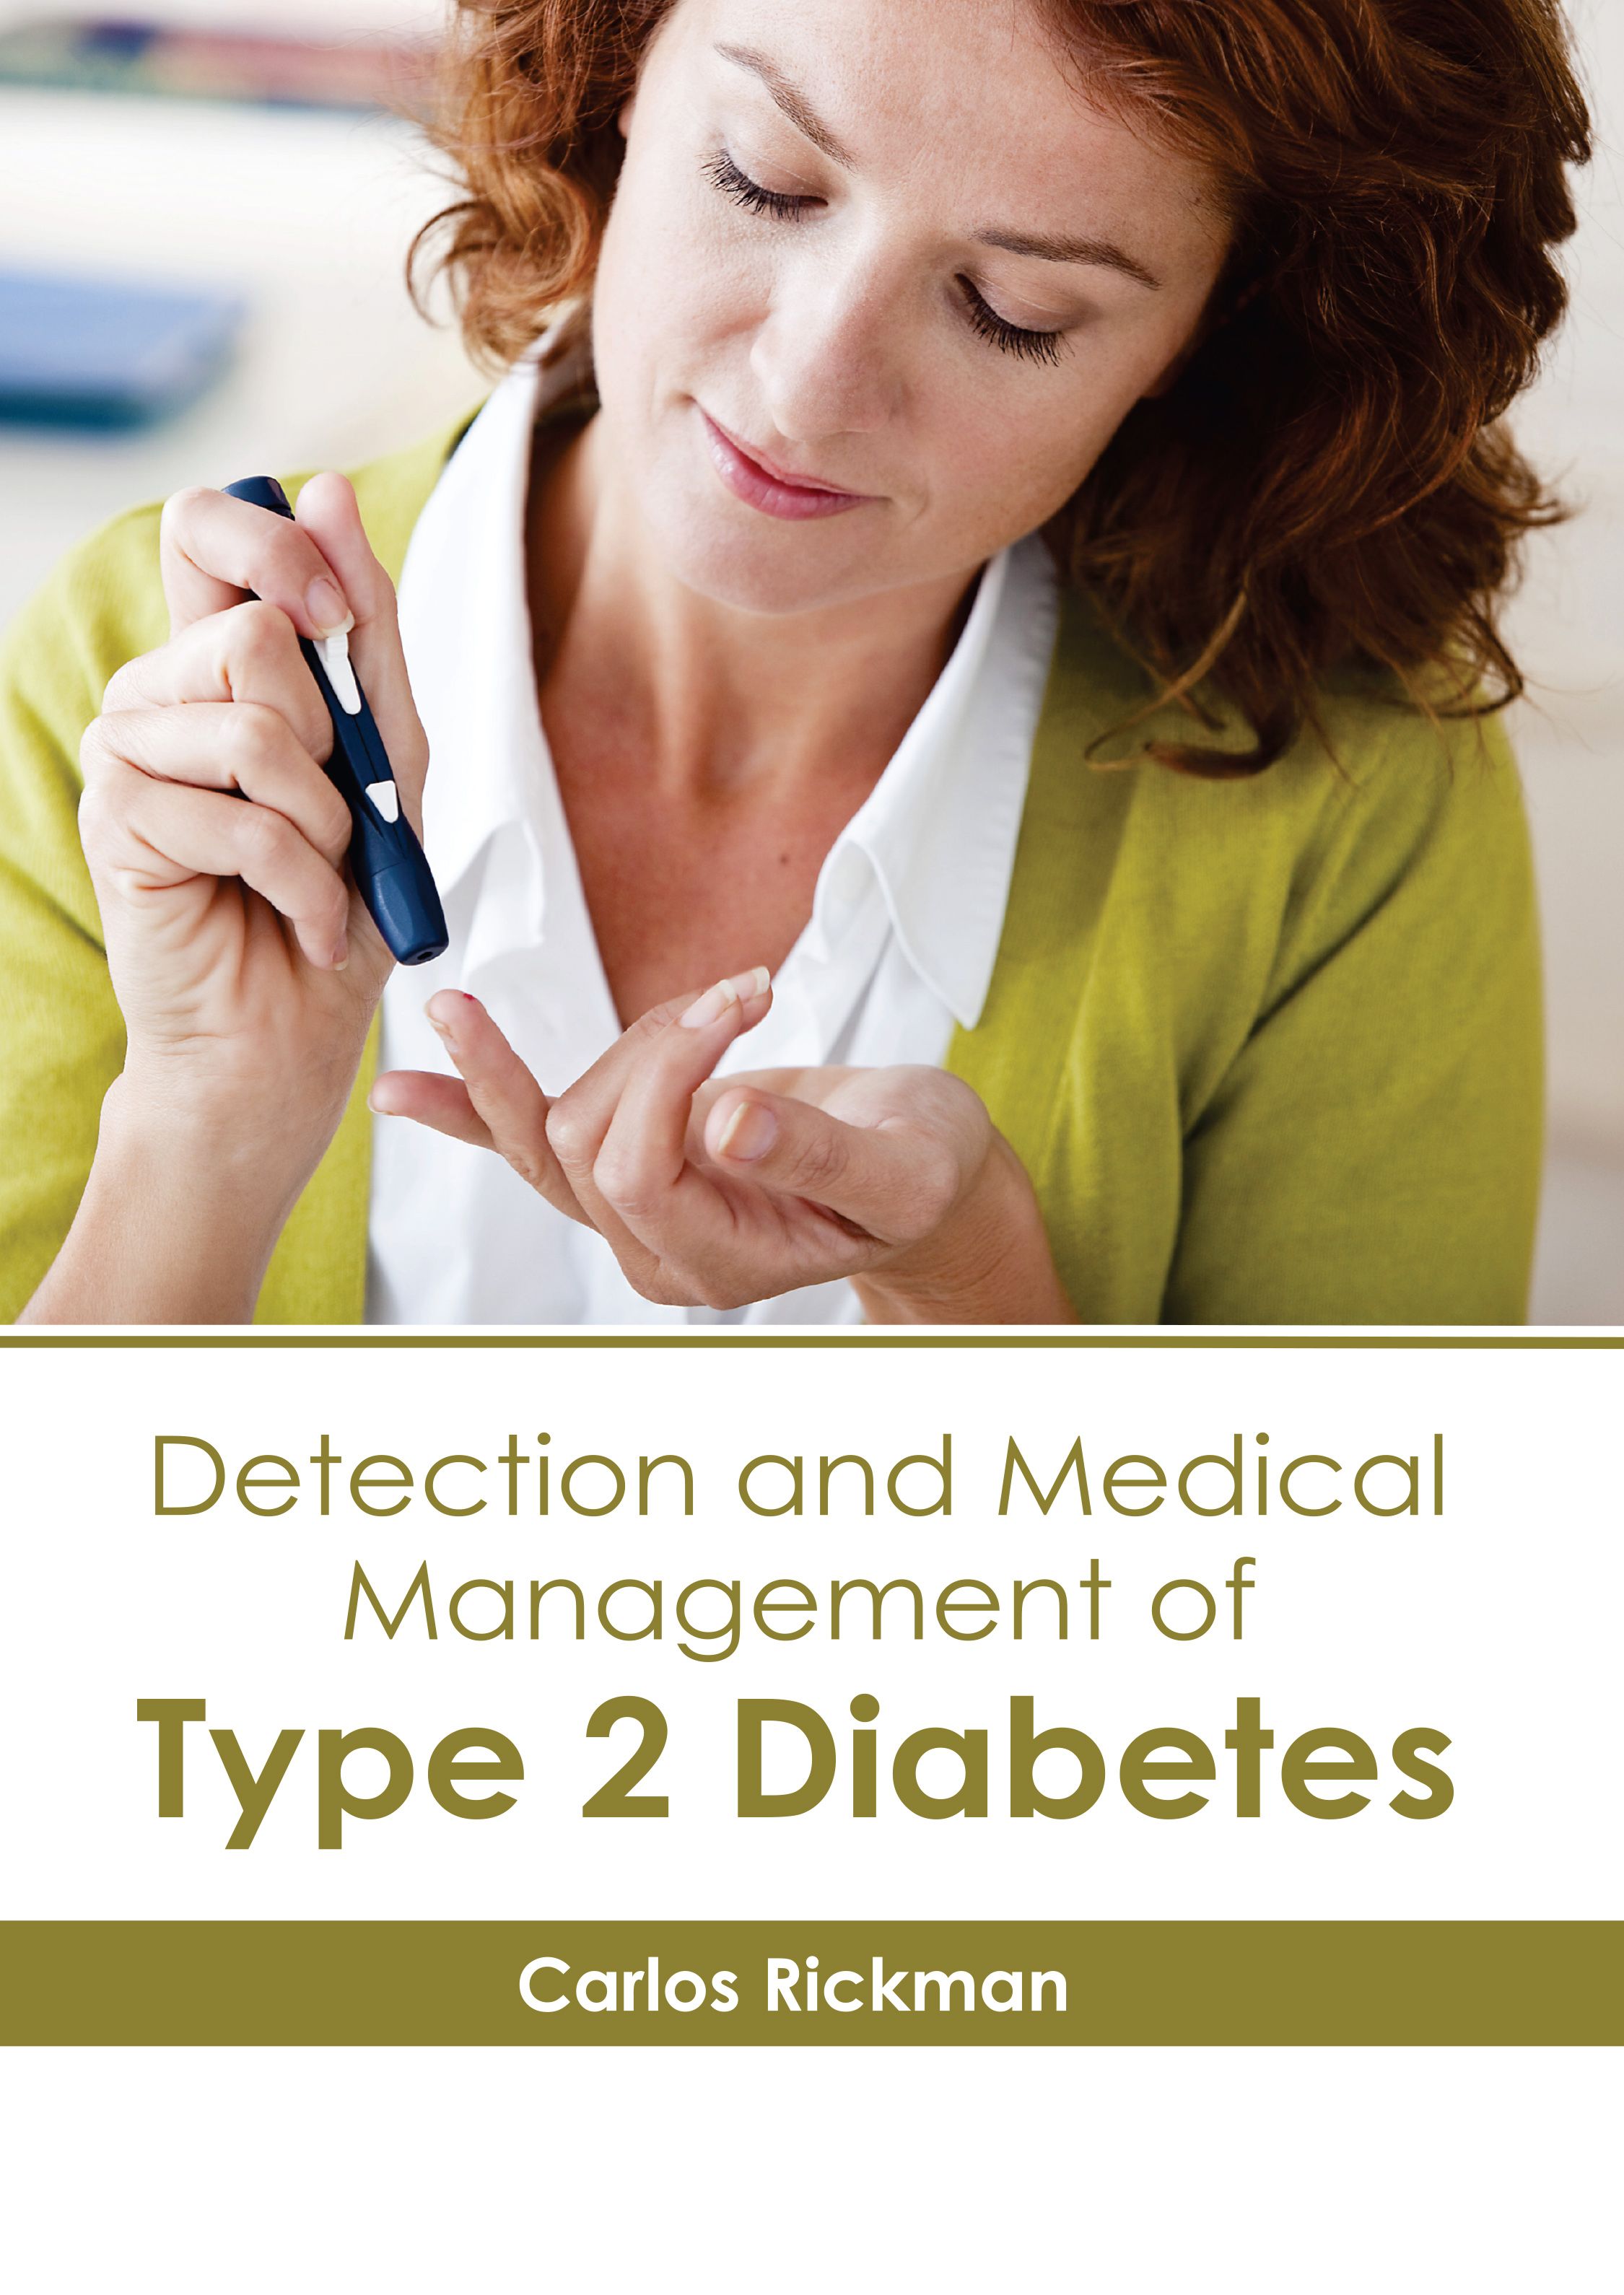 

exclusive-publishers/american-medical-publishers/detection-and-medical-management-of-type-2-diabetes-9798887400433